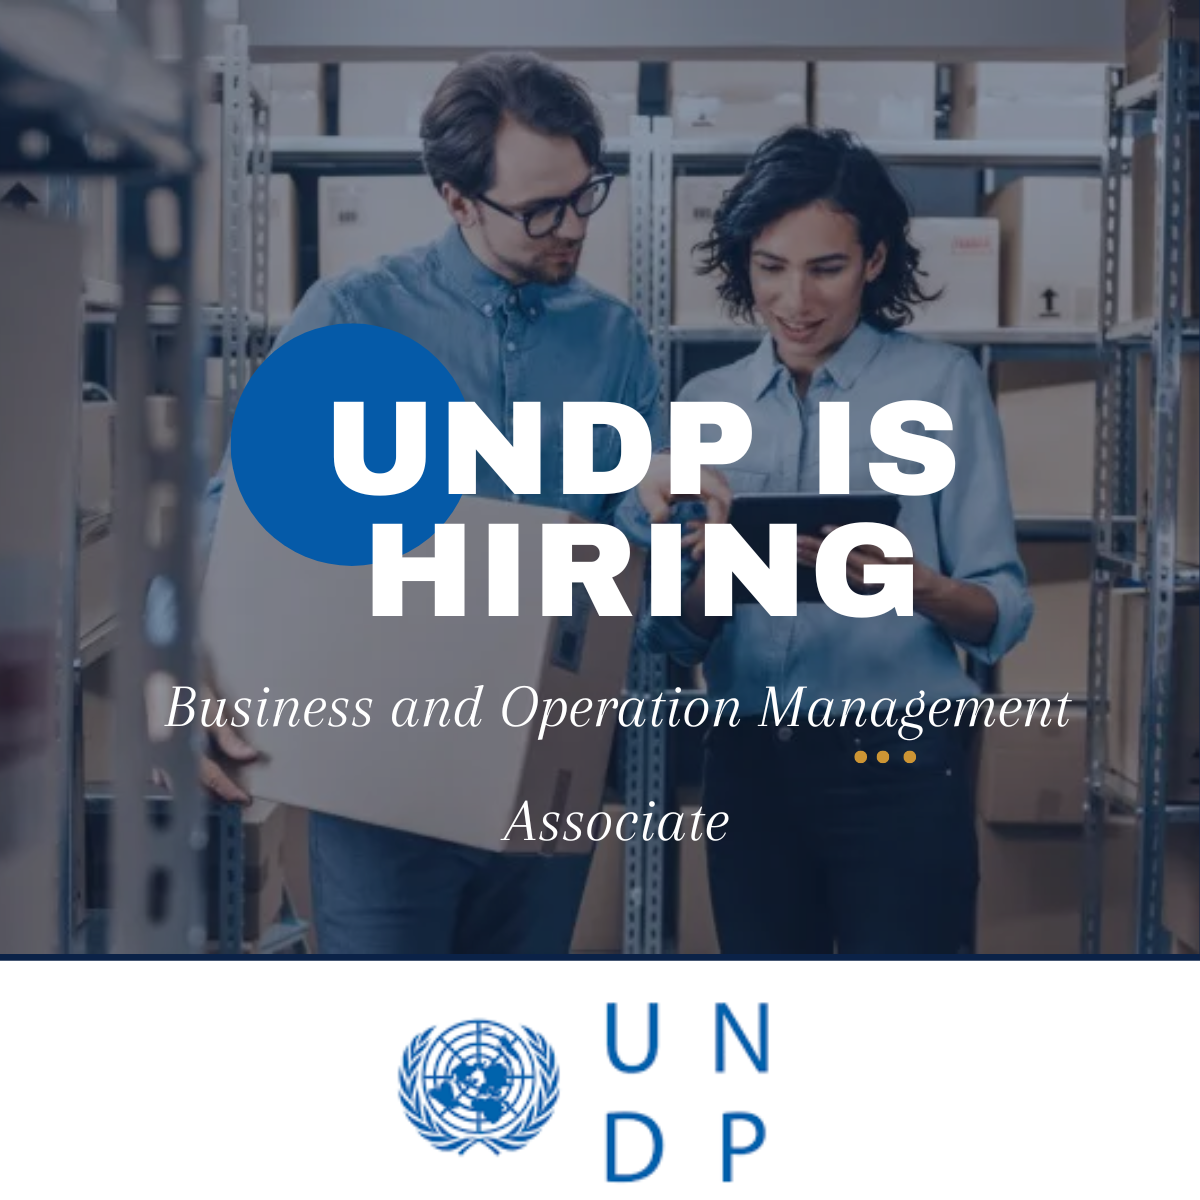 Exciting opportunity alert: UNDP is looking for a Business and Operation Management Associate. Don't miss out, apply now!